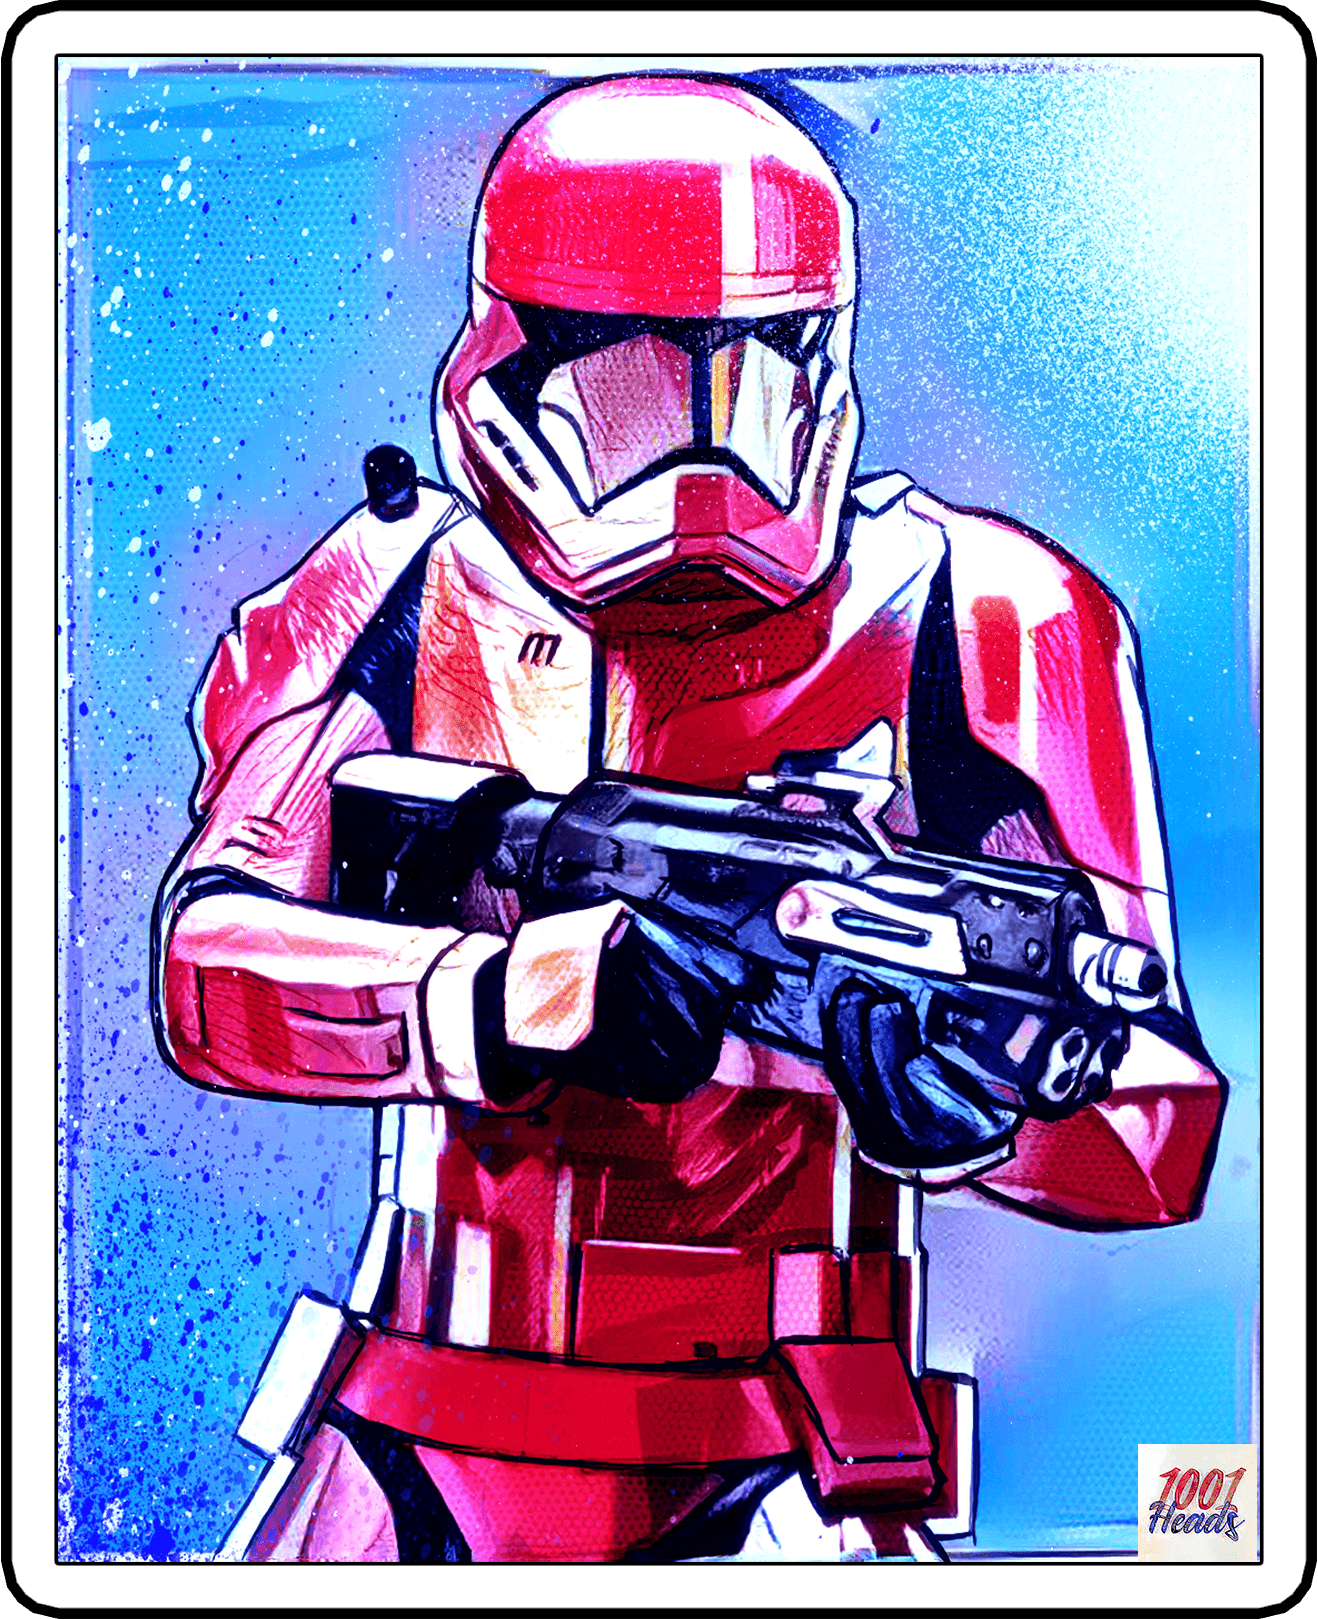 1001Heads_TROOPERS_03 #302